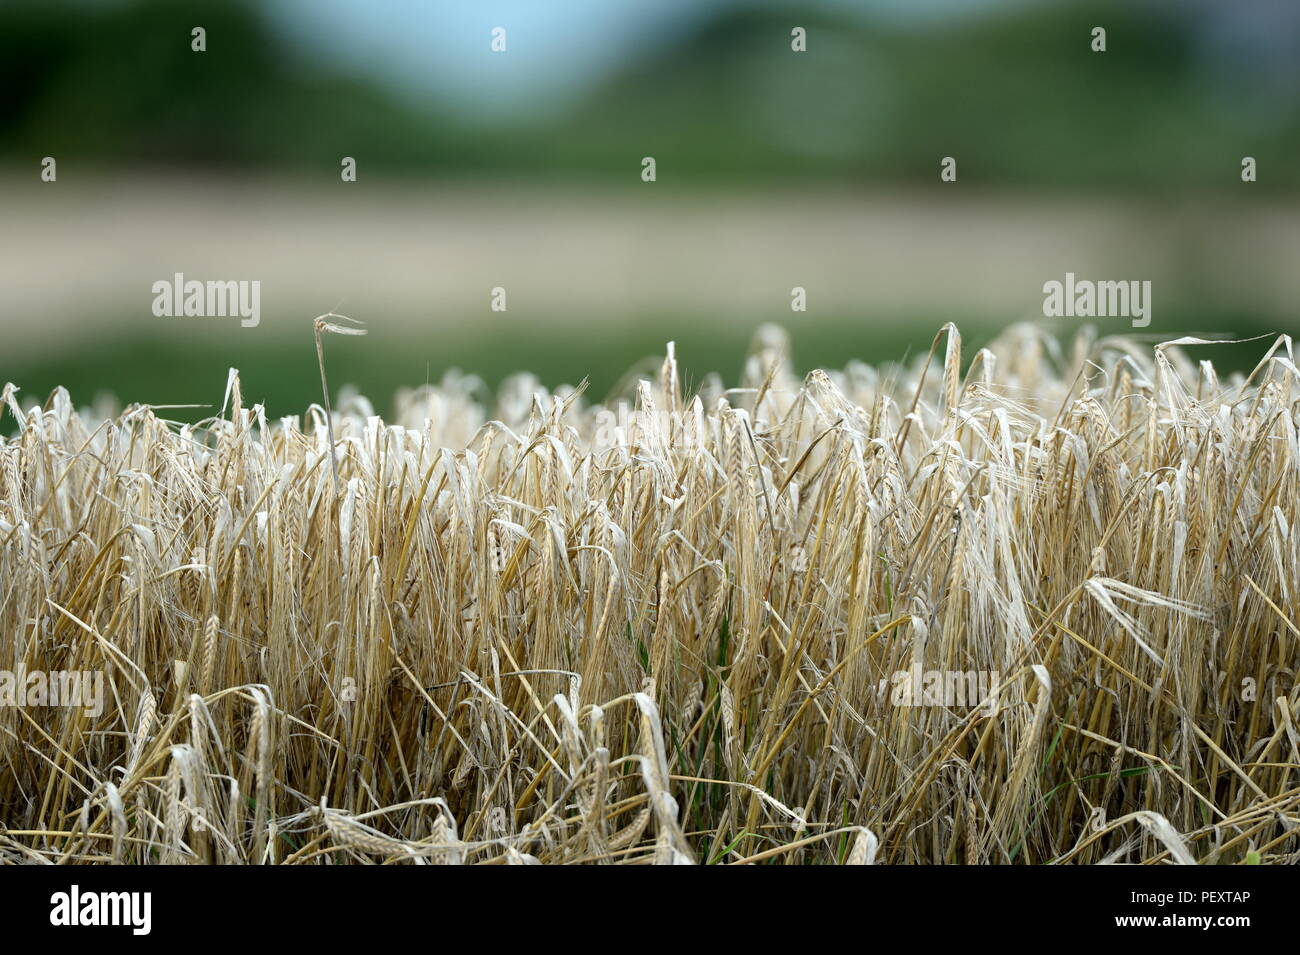 Field of barley ready for harvesting selectively focused Stock Photo